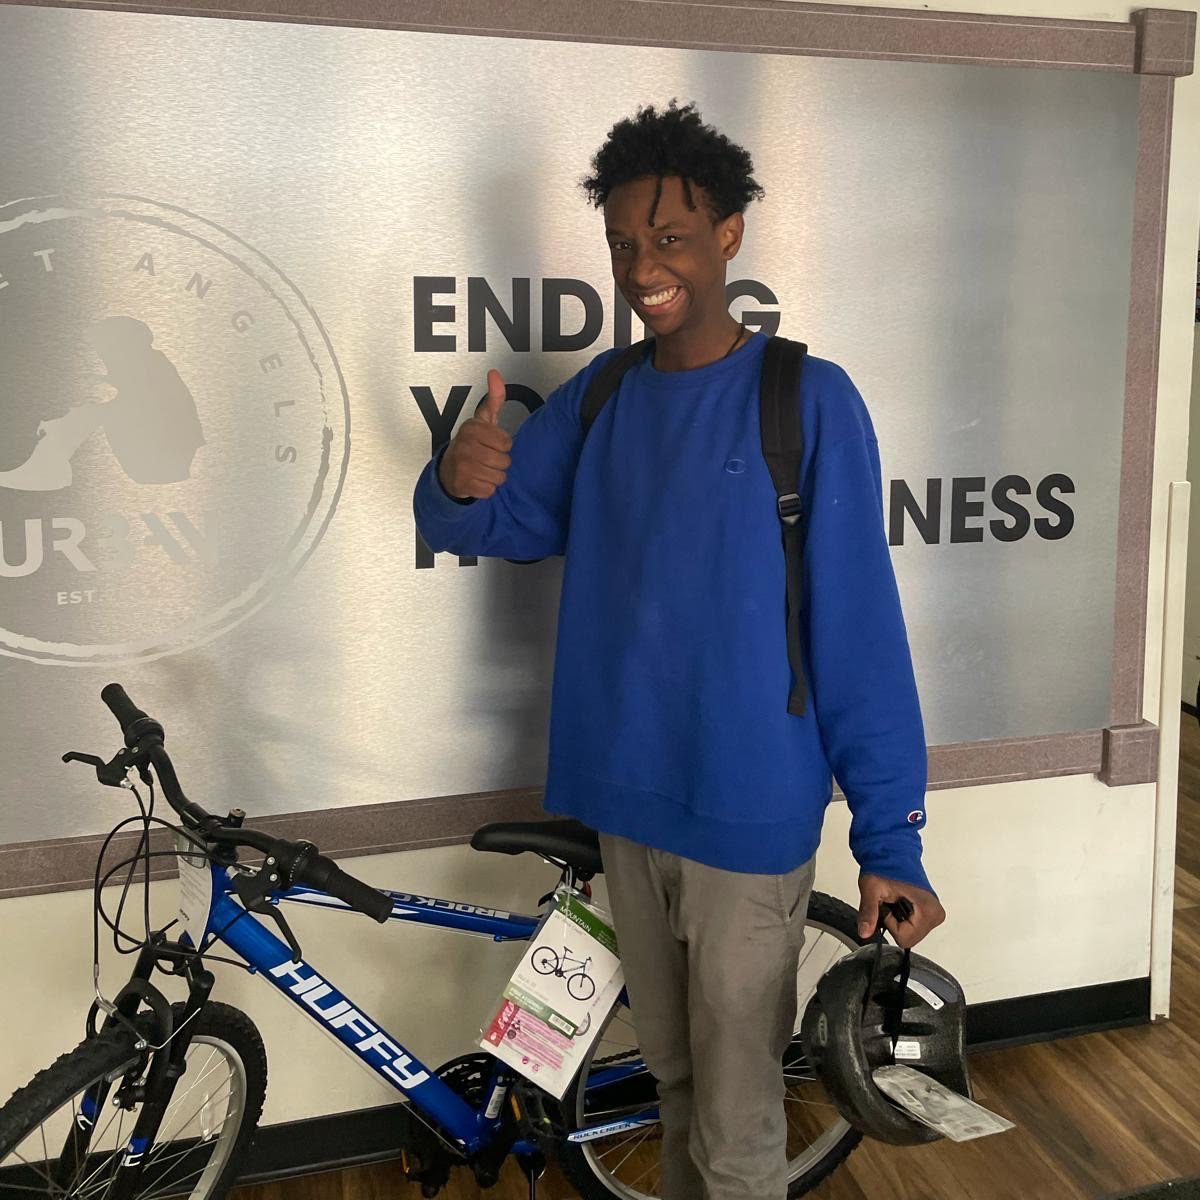 So grateful to be able to bless this youth with a new bike! He is so excited to take it for a spin! 🚲😁

#urbanstreetangels #endyouthhomelessness #newbike #donation #blessed #grateful